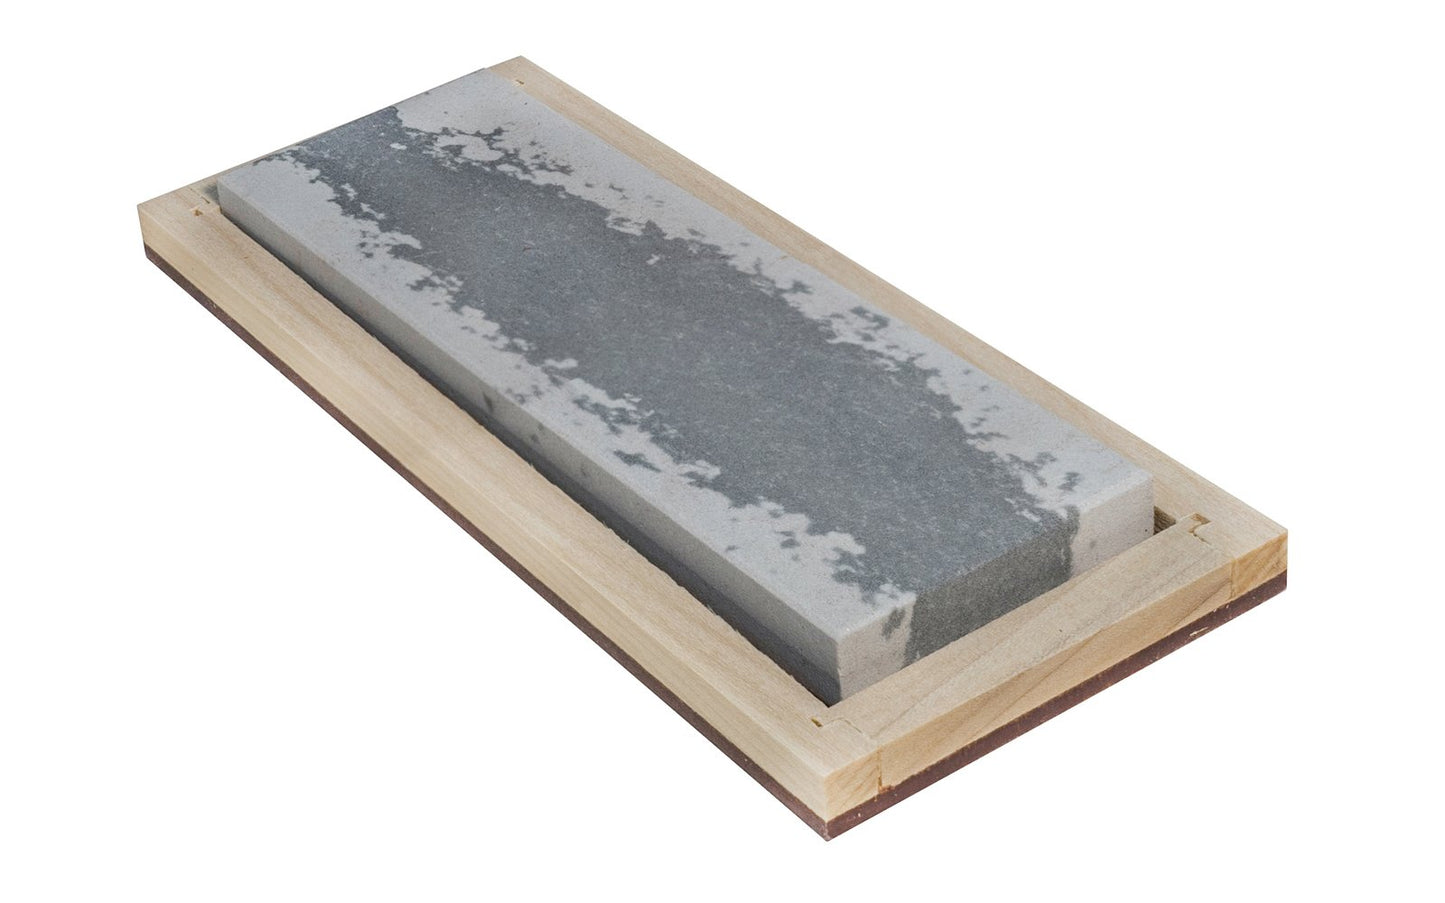 Soft Arkansas Bench Stone with Wooden Box ~ 6" x 2" - Made in USA ~ good extra-fine stone. It is the least dense & coarsest grained of the natural Arkansas stones & good for starting an edge on your tools & knives; commonly used after synthetic or oil stone - Model No. MAB-62-C